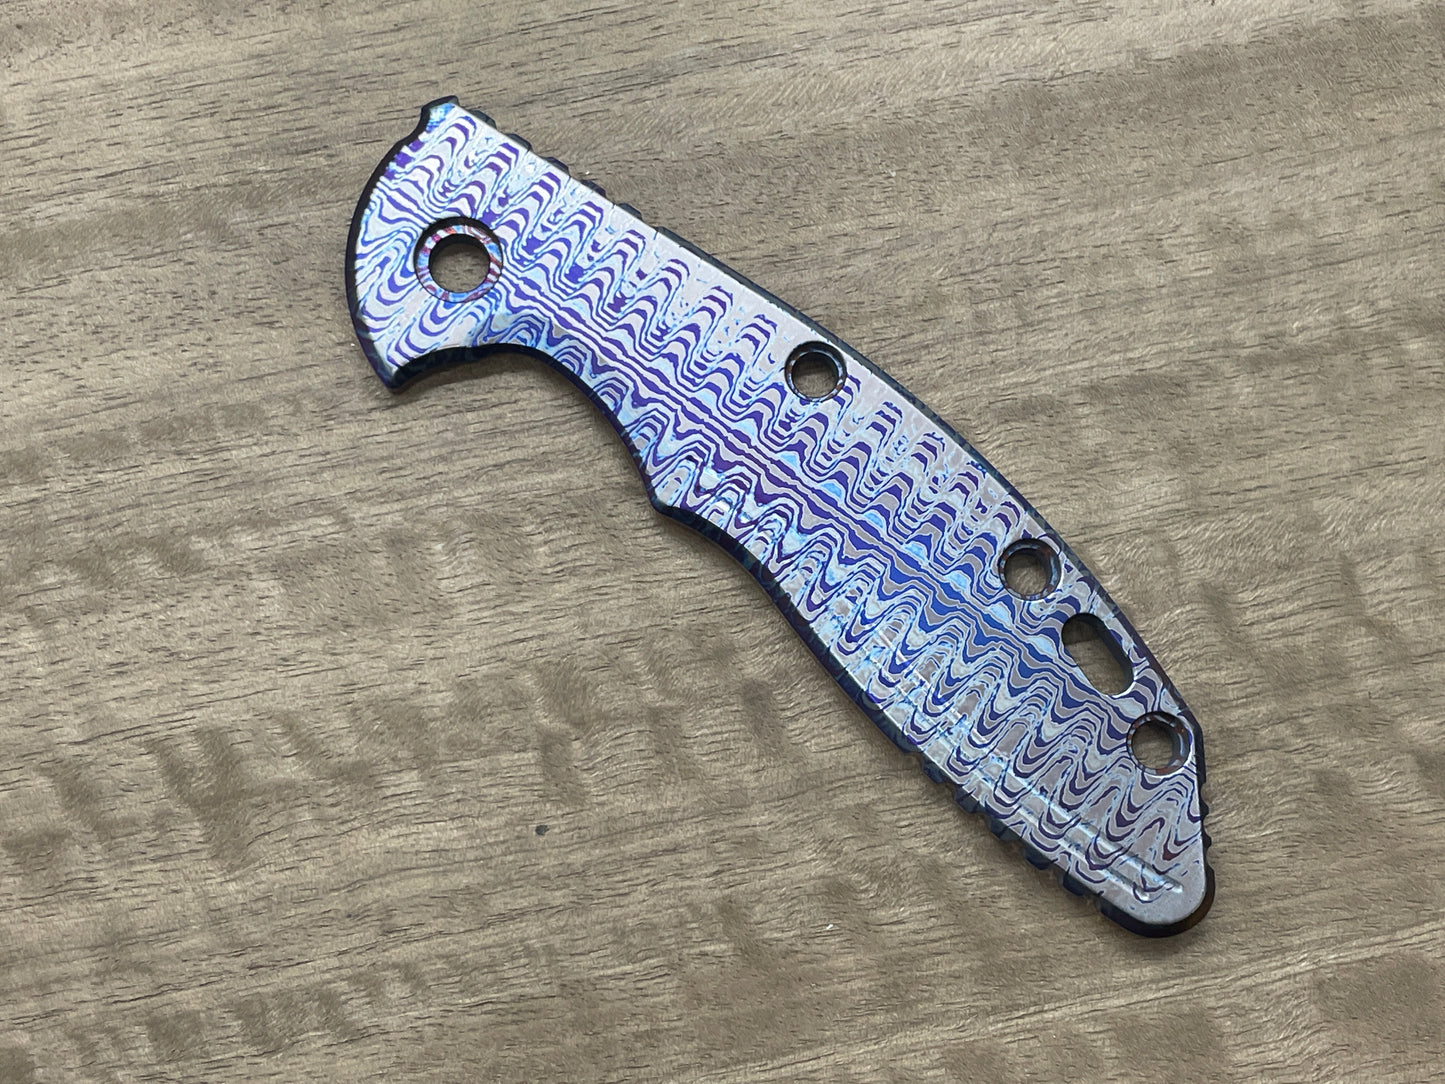 RIPPLE Flamed Titanium scale for XM-18 3.5 HINDERER